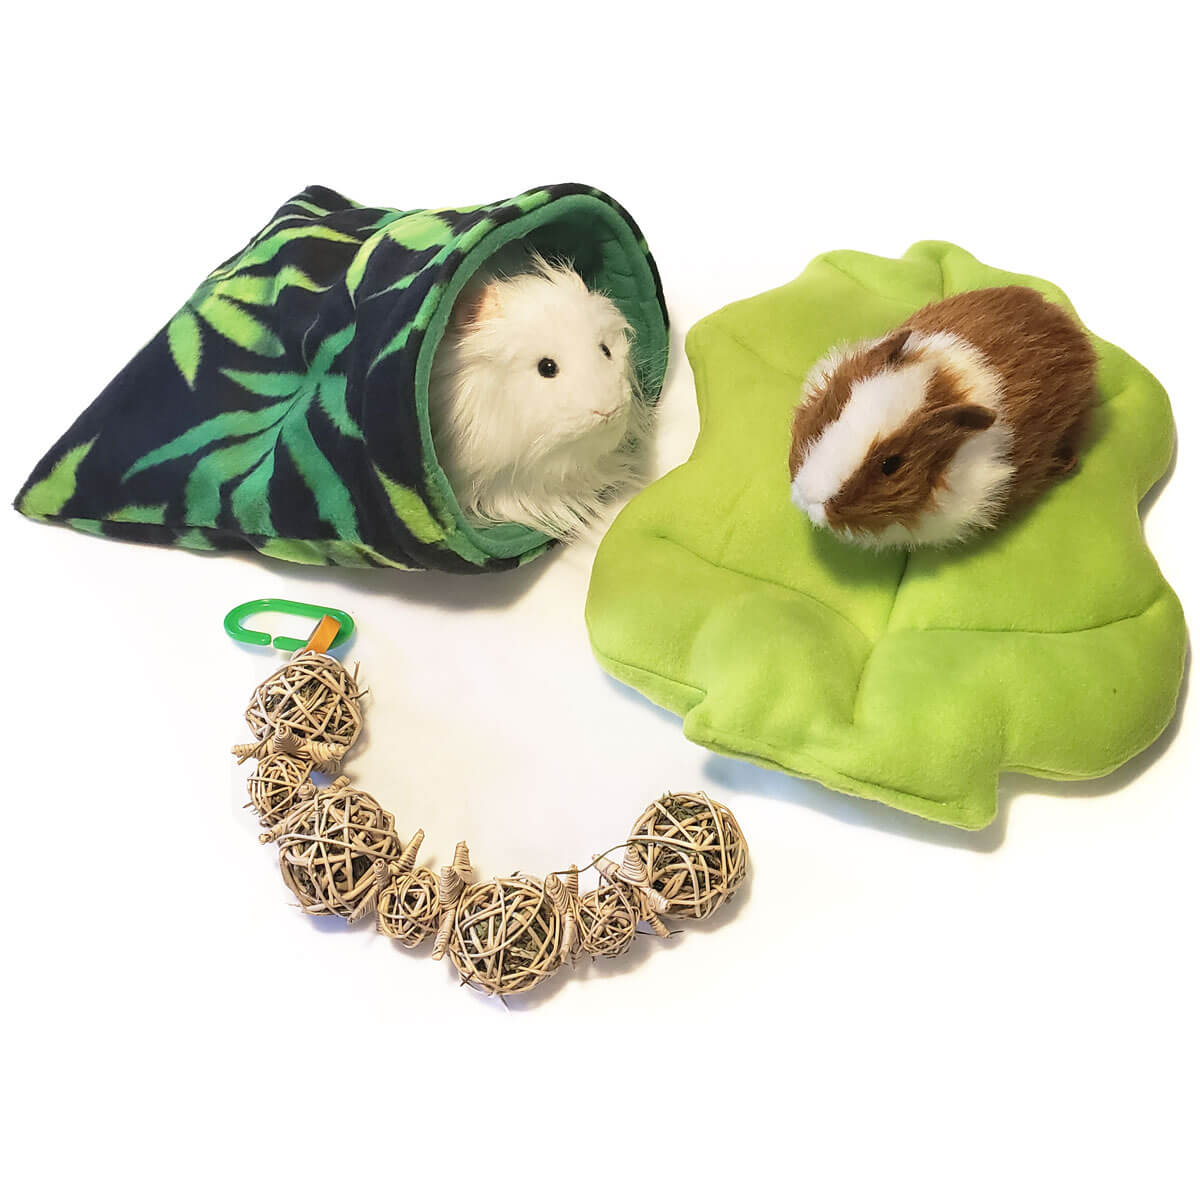 Cannabis Bed and Treat Bundle for Guinea Pigs